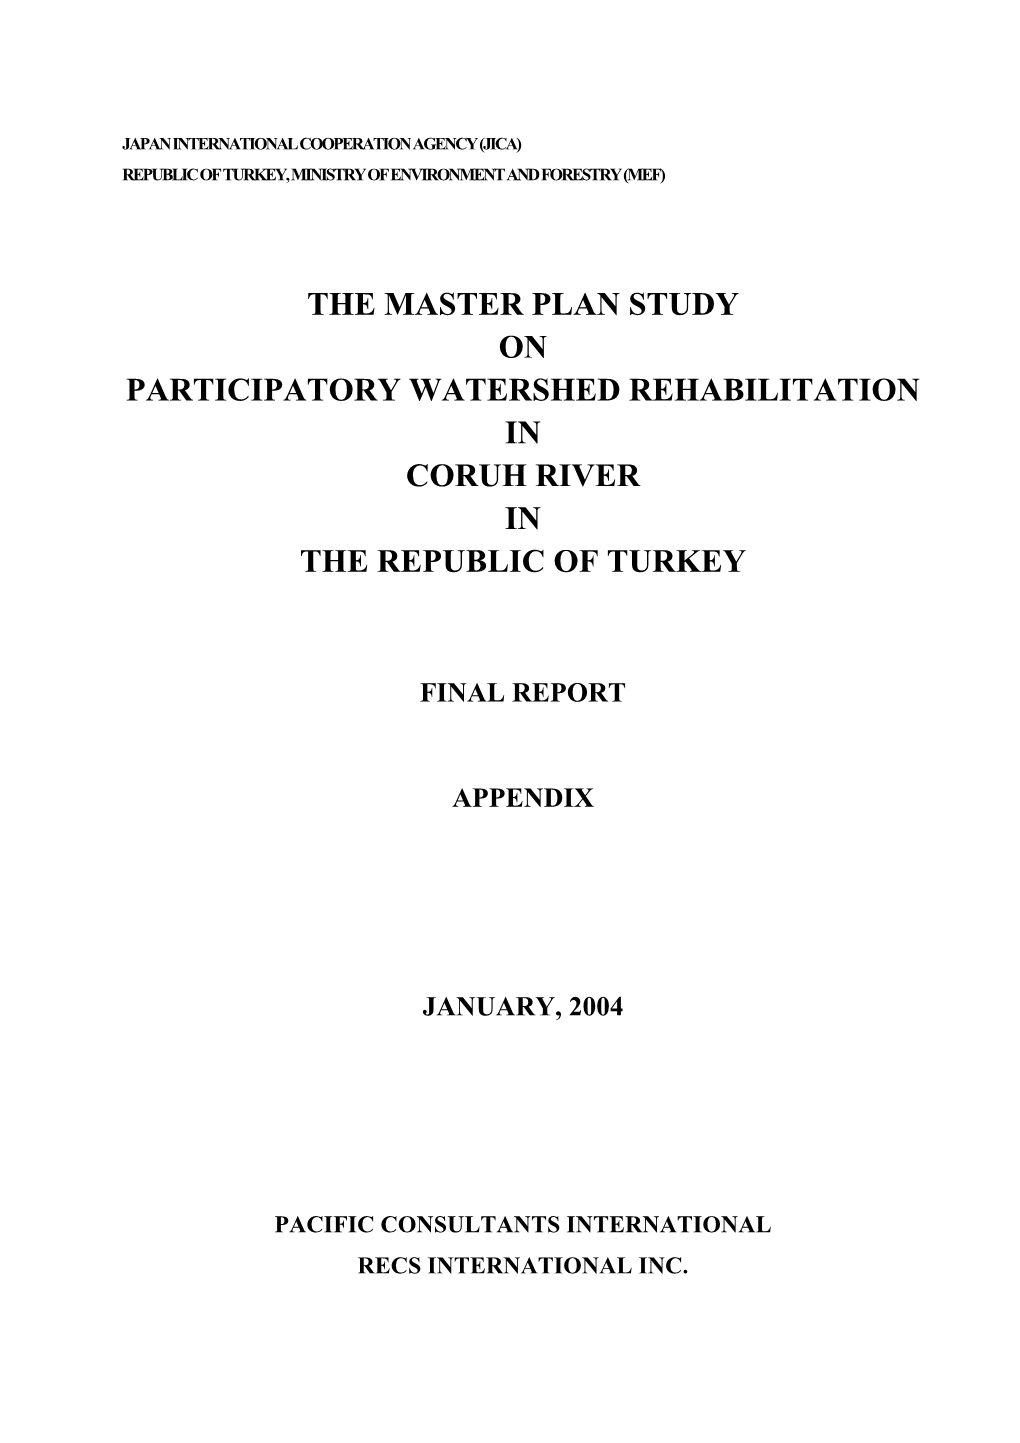 The Master Plan Study on Participatory Watershed Rehabilitation in Coruh River in the Republic of Turkey